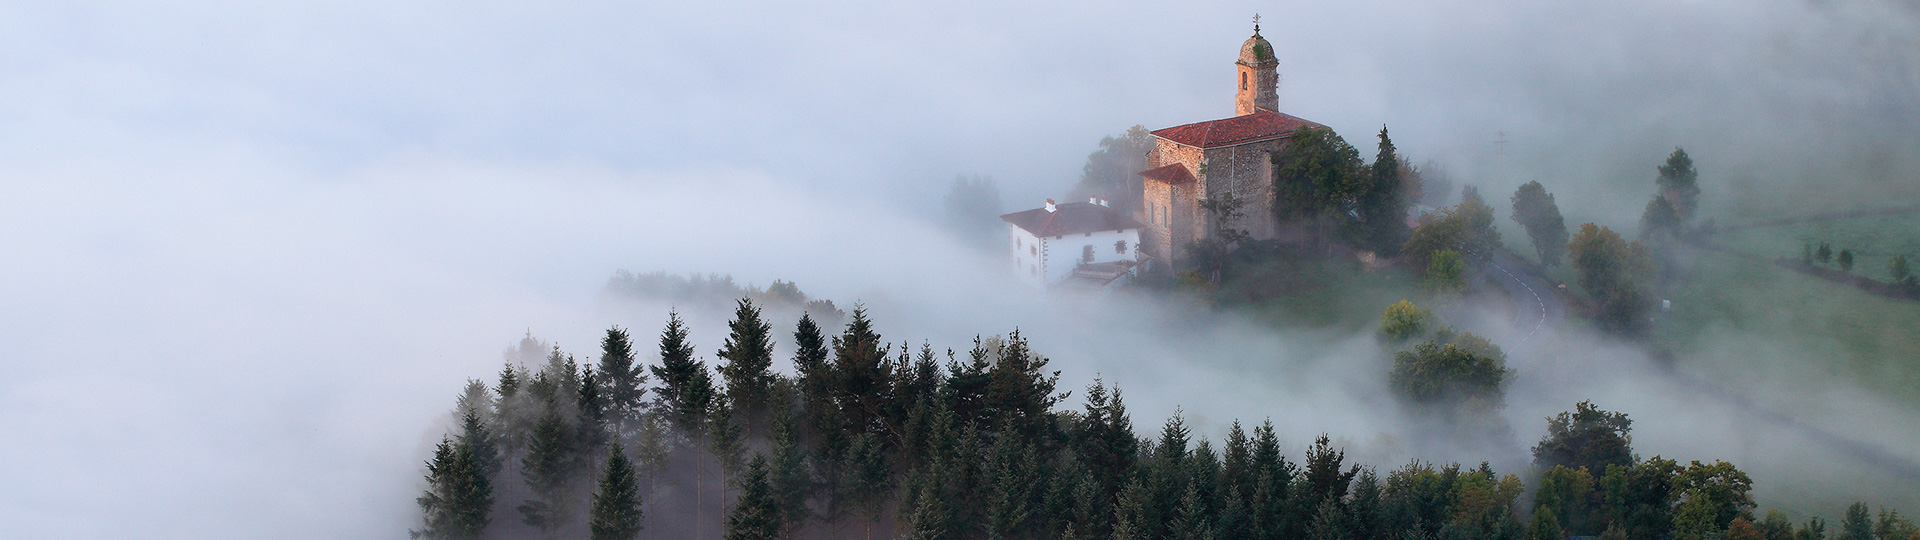 Early morning mist in the Aramayona Valley, Basque Country